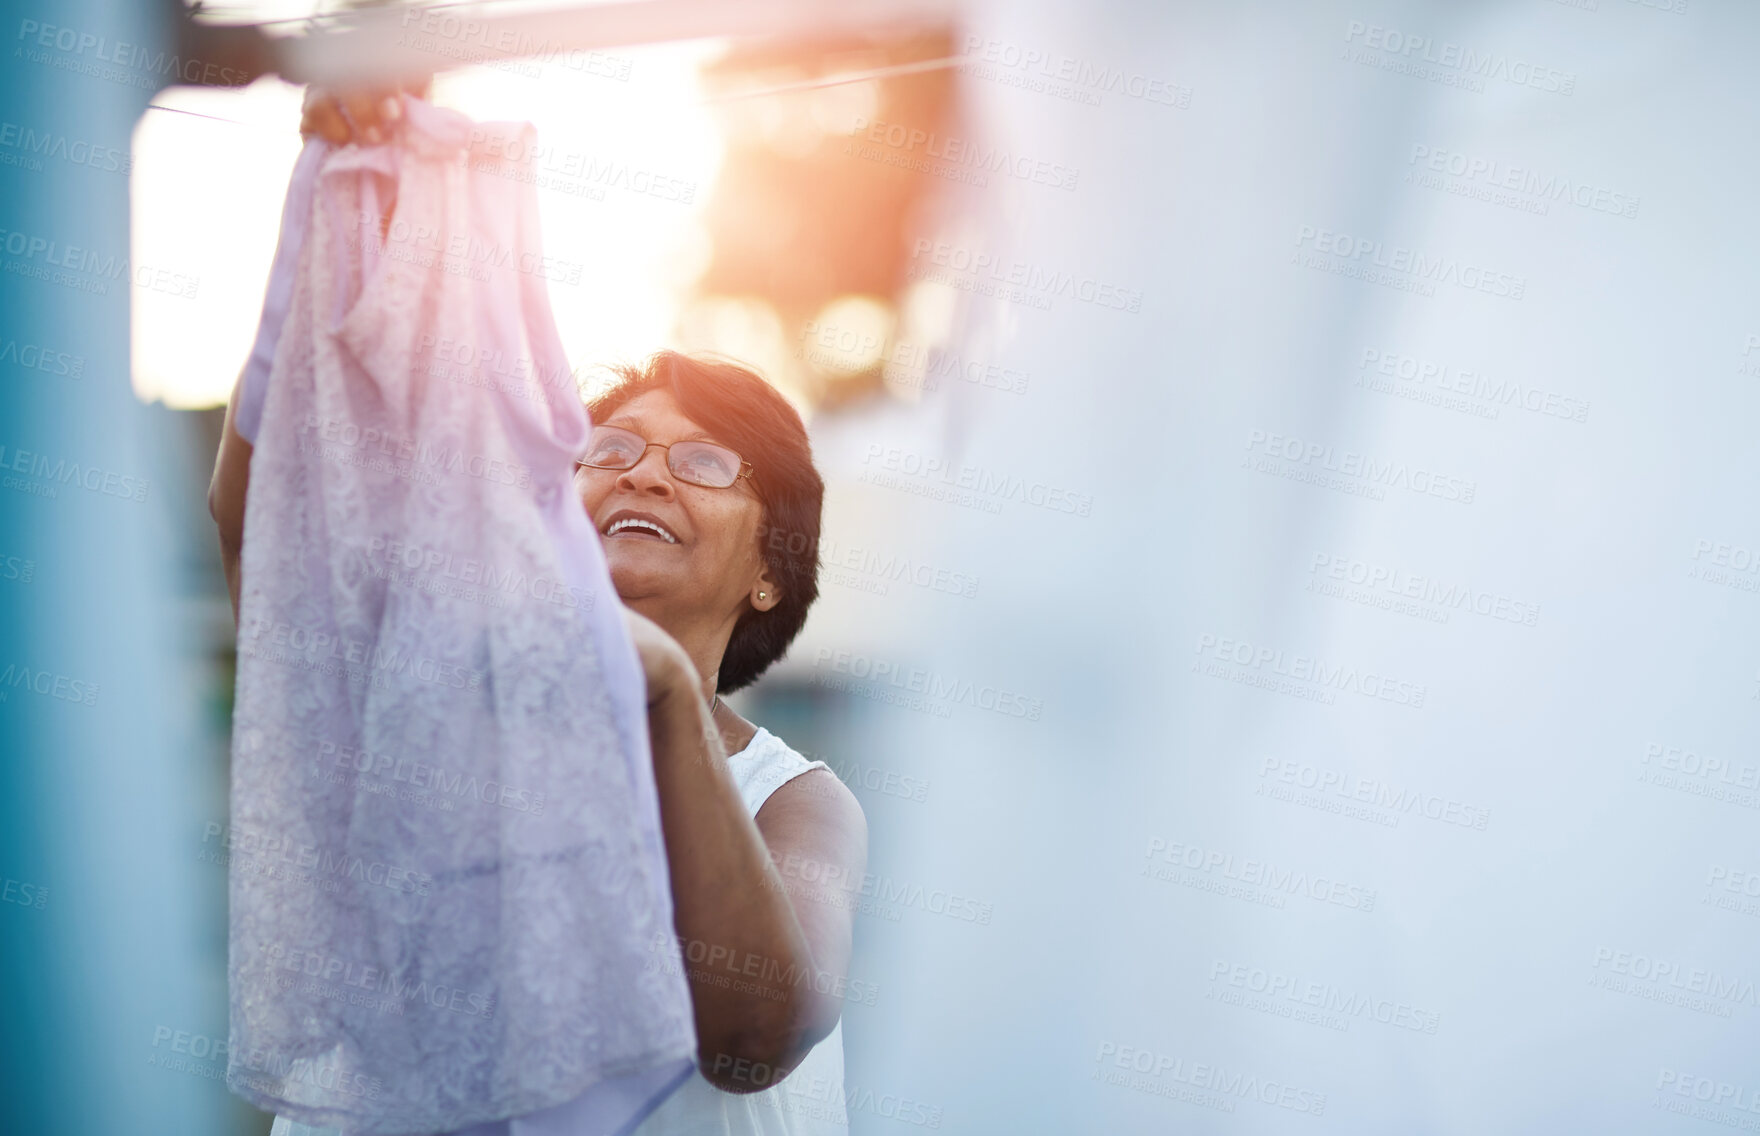 Buy stock photo Shot of a mature woman hanging up laundry on a washing line